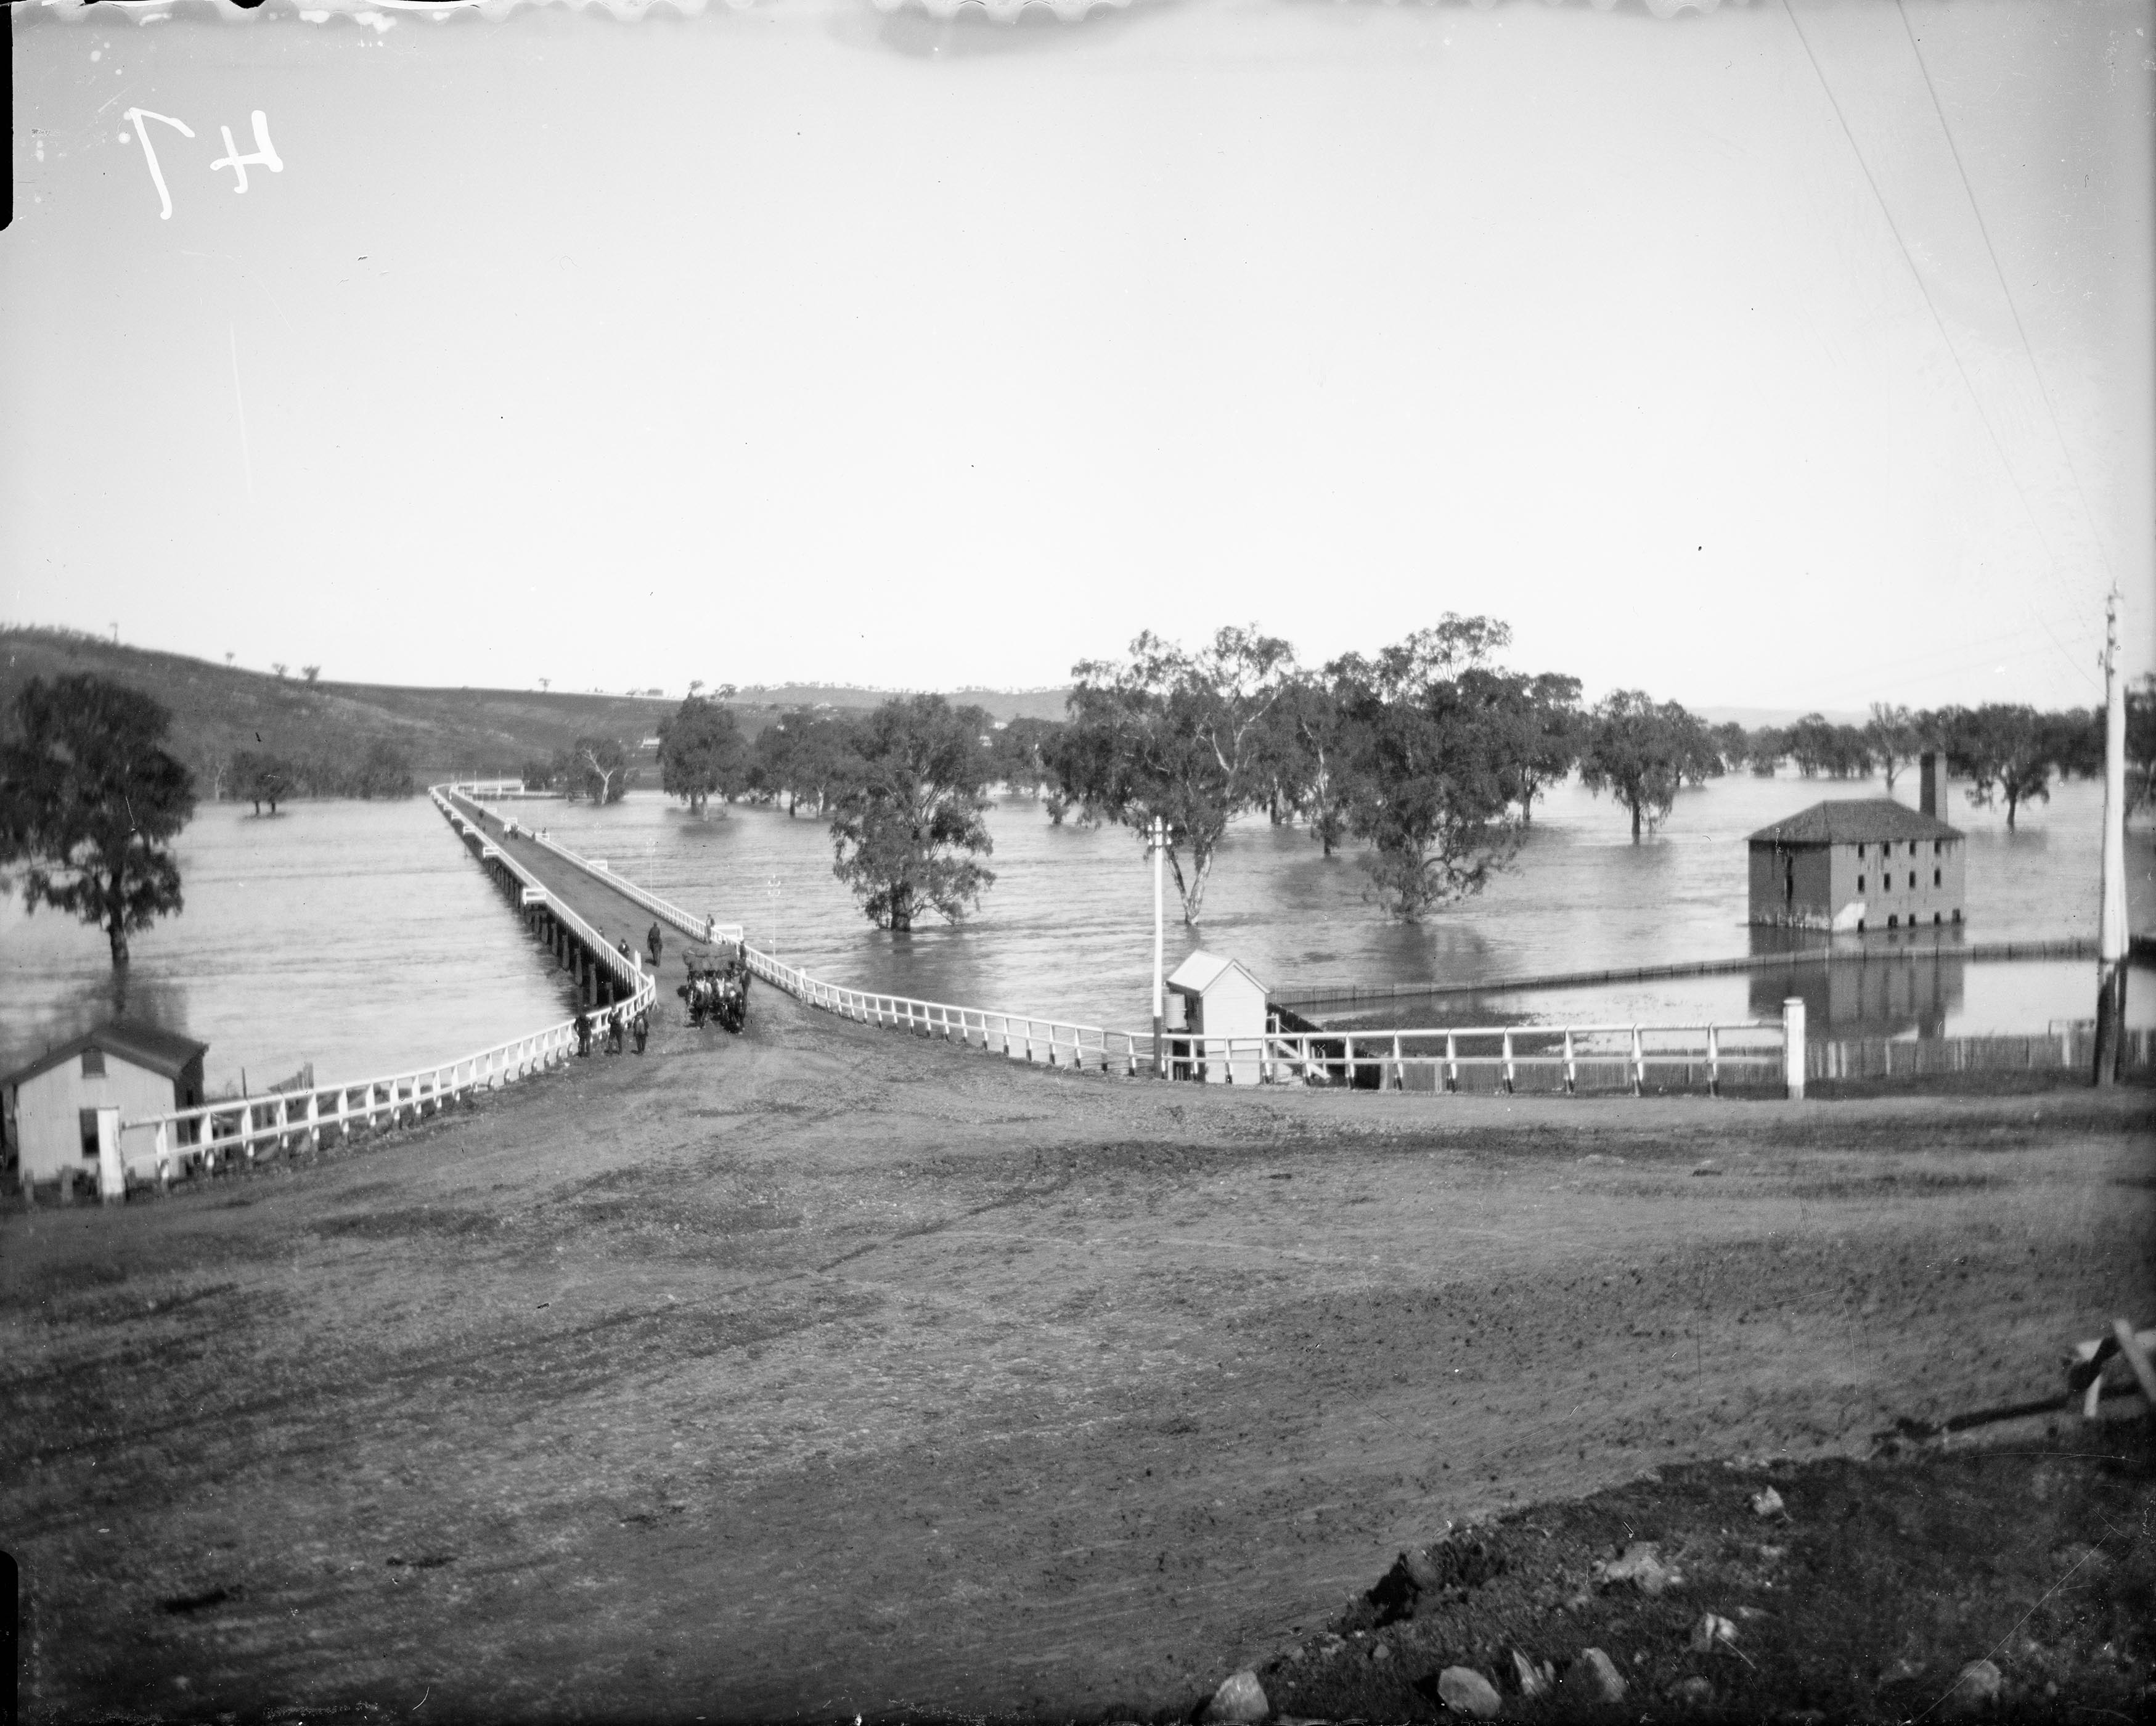 Prince Alfred Bridge and the flour mill during the 1900 flood in Gundagai, New South Wales.